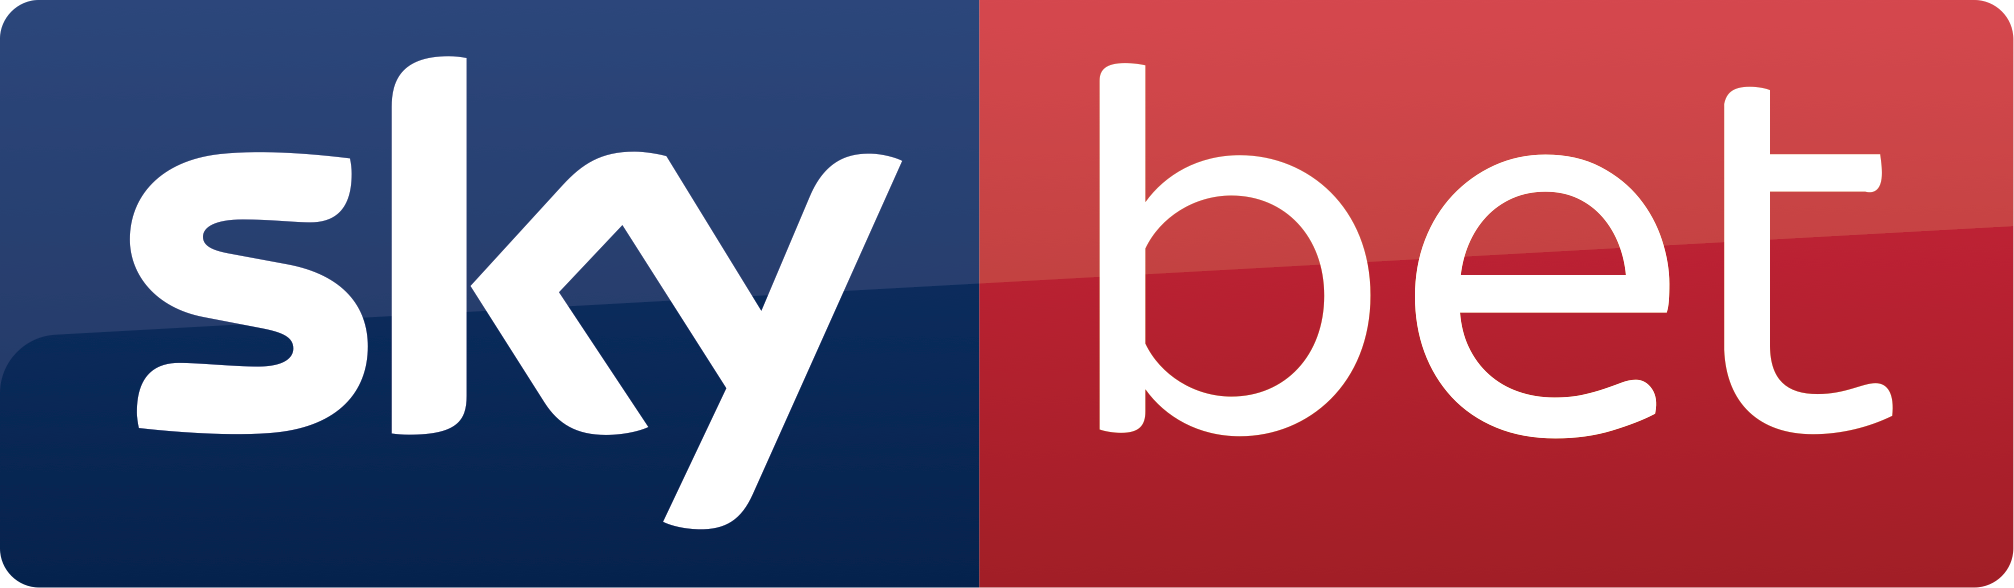 Stars Group to Expand Its Non-Poker Reach by Acquiring Sky Bet for $4.7 Billion